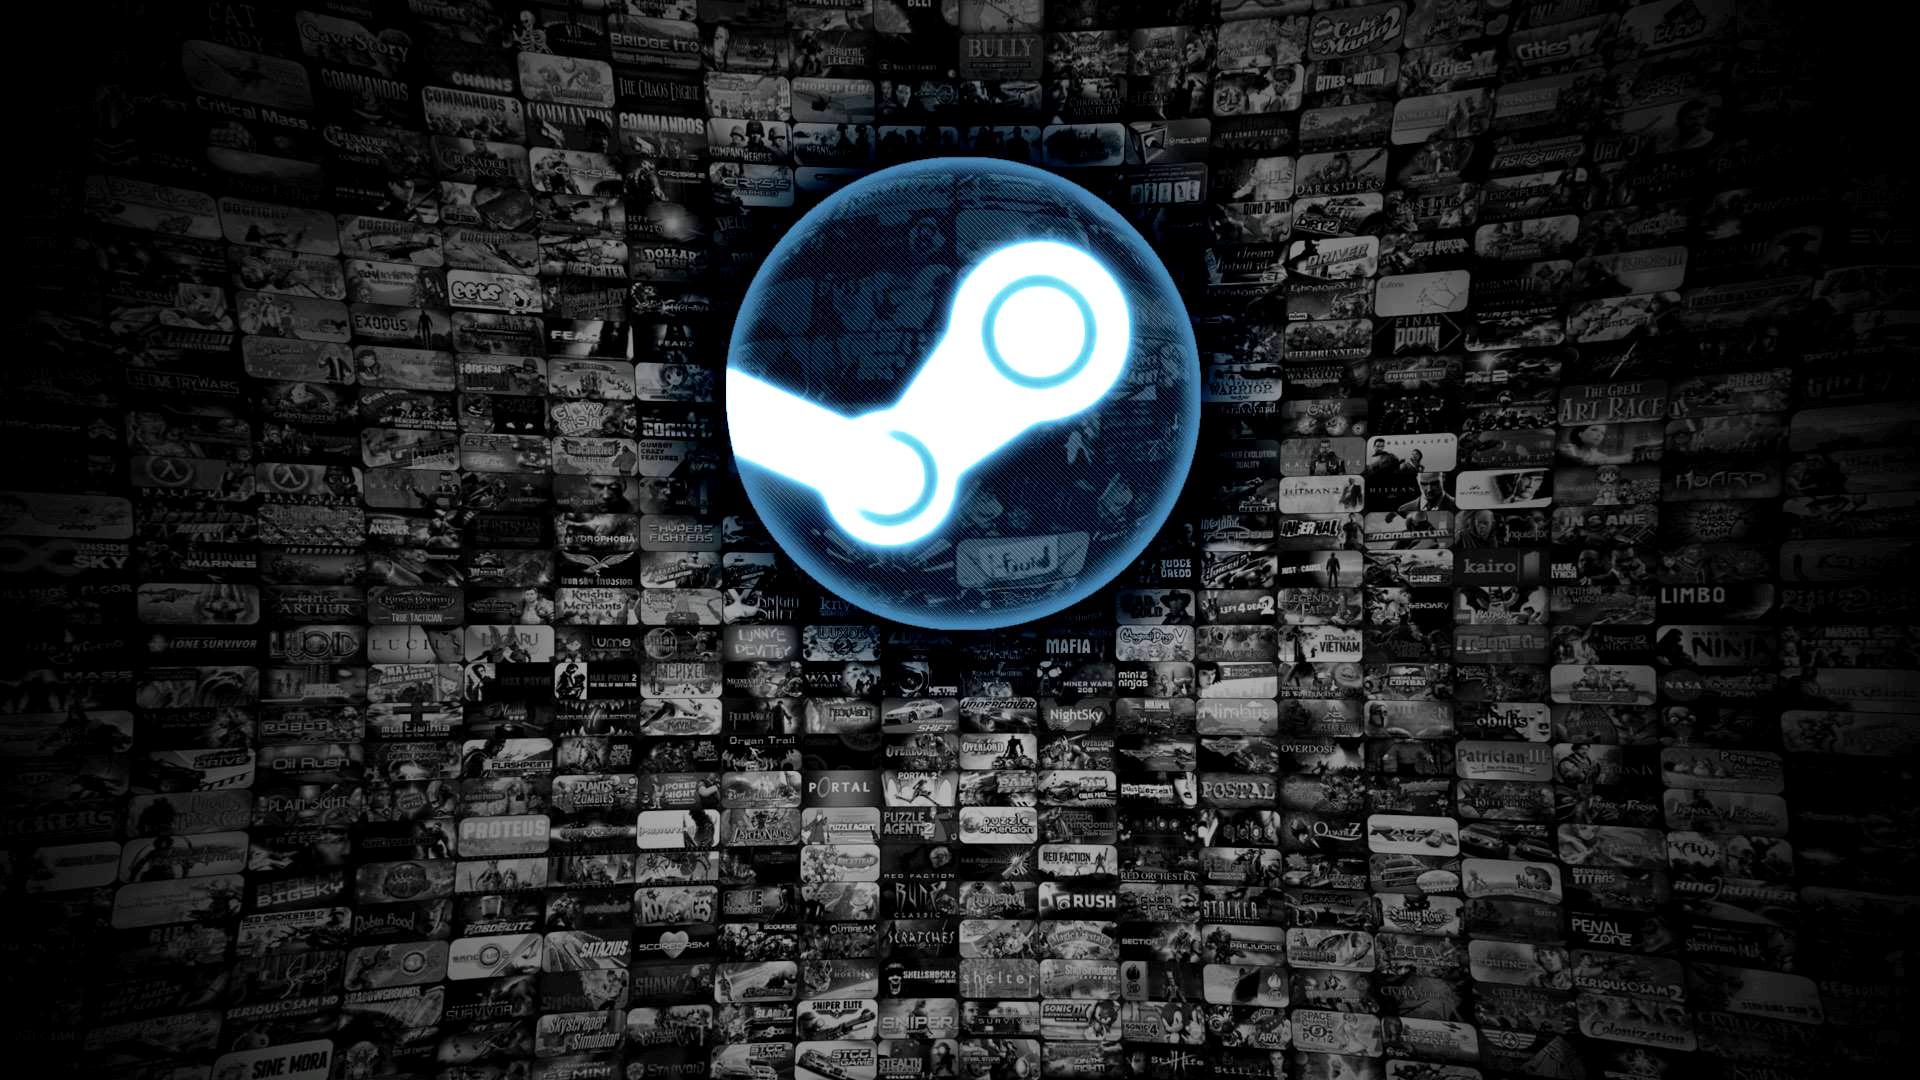 It Happened To Me: My Steam Account Got Hacked